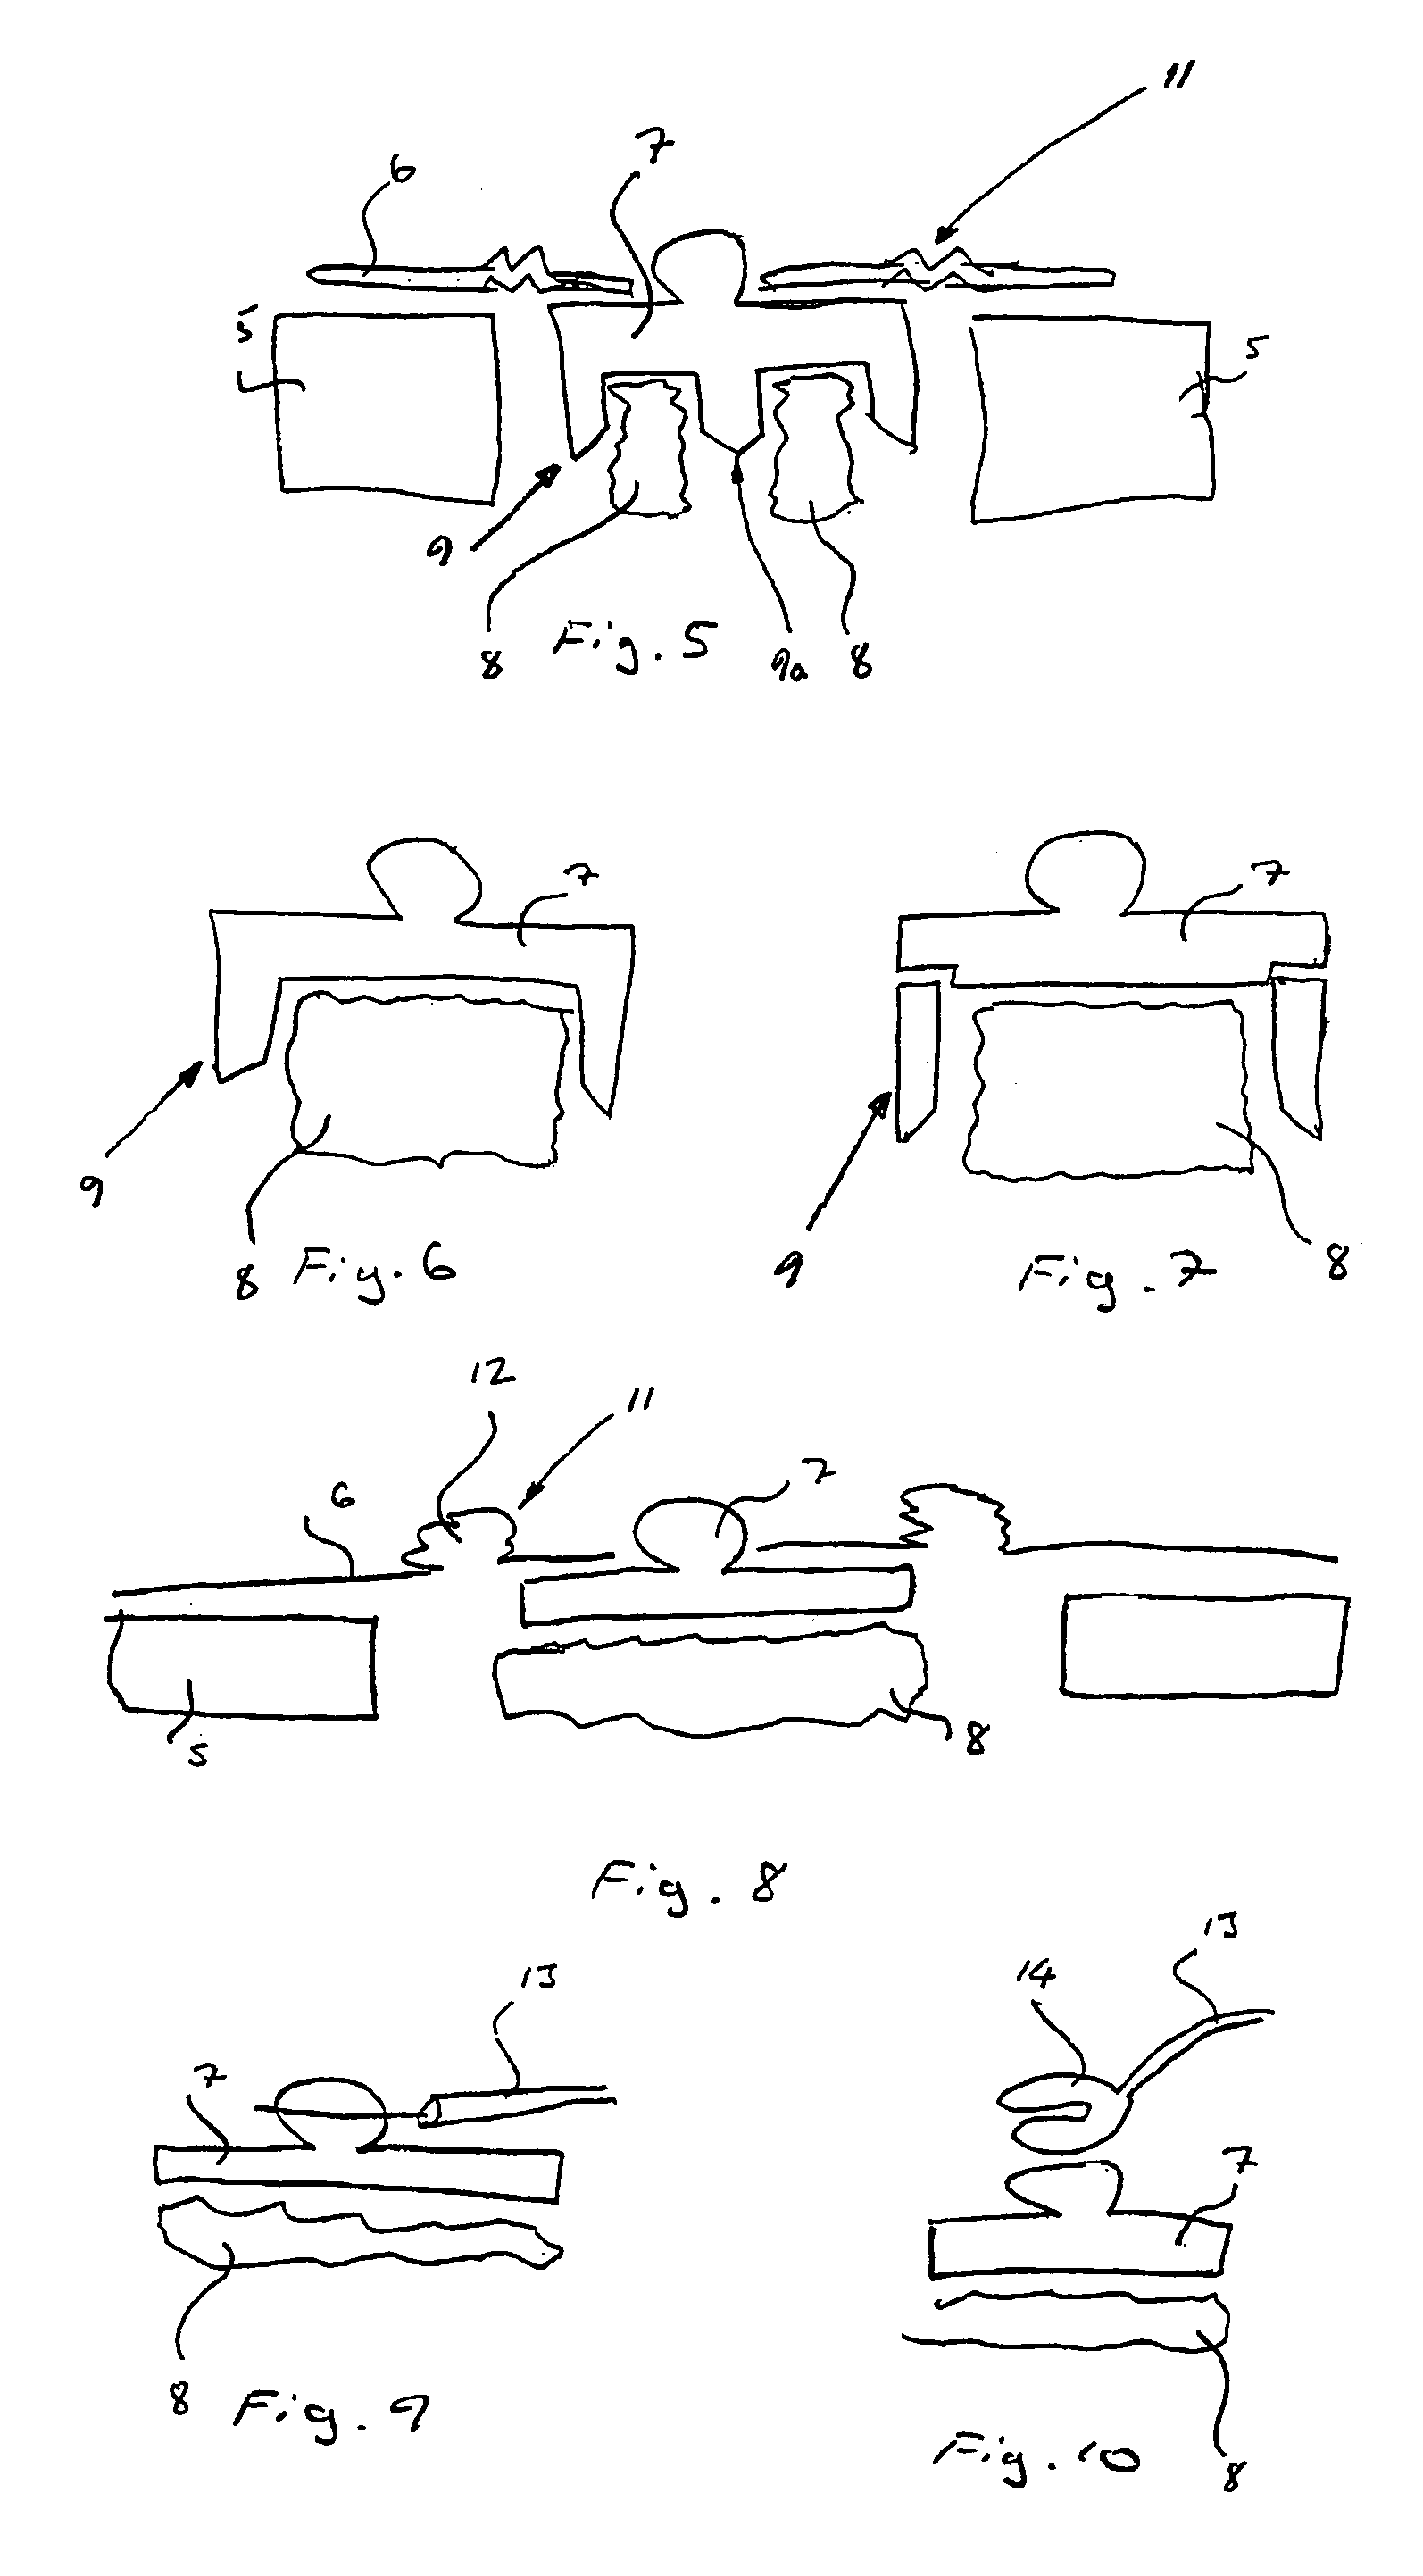 Electrode for obtaining a biopotential signal